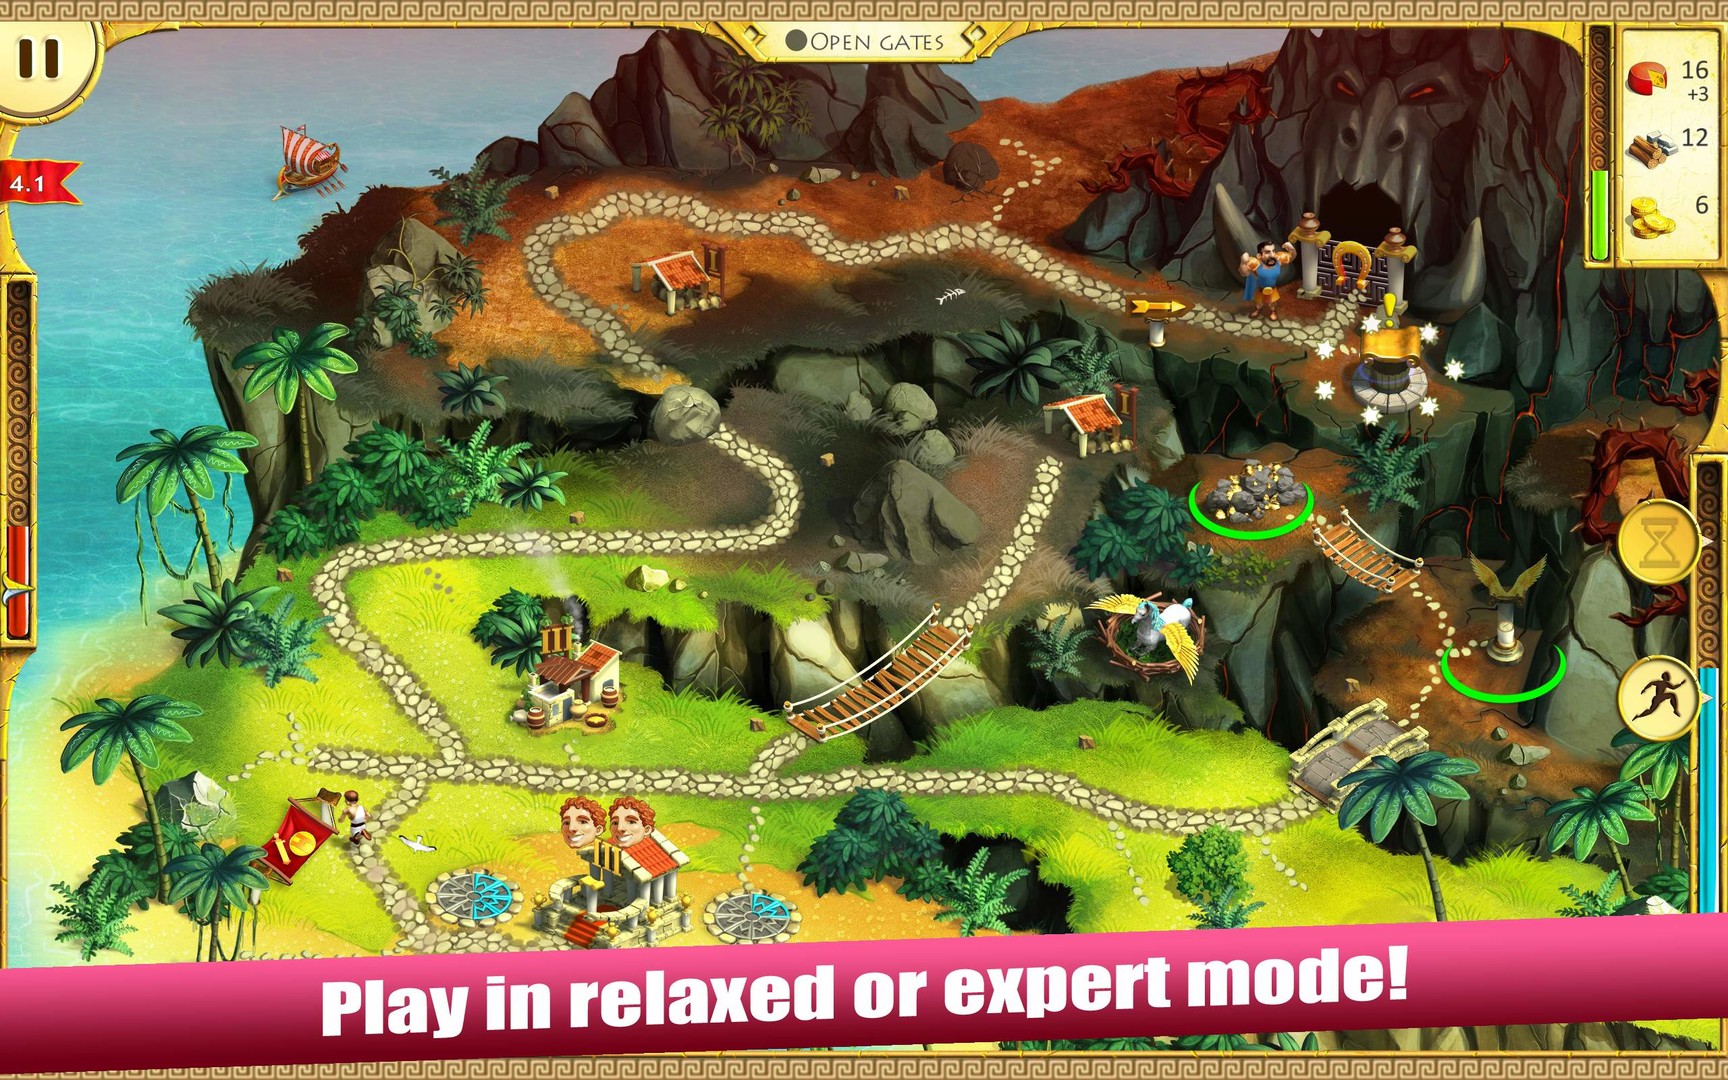 12 labours of hercules game free download